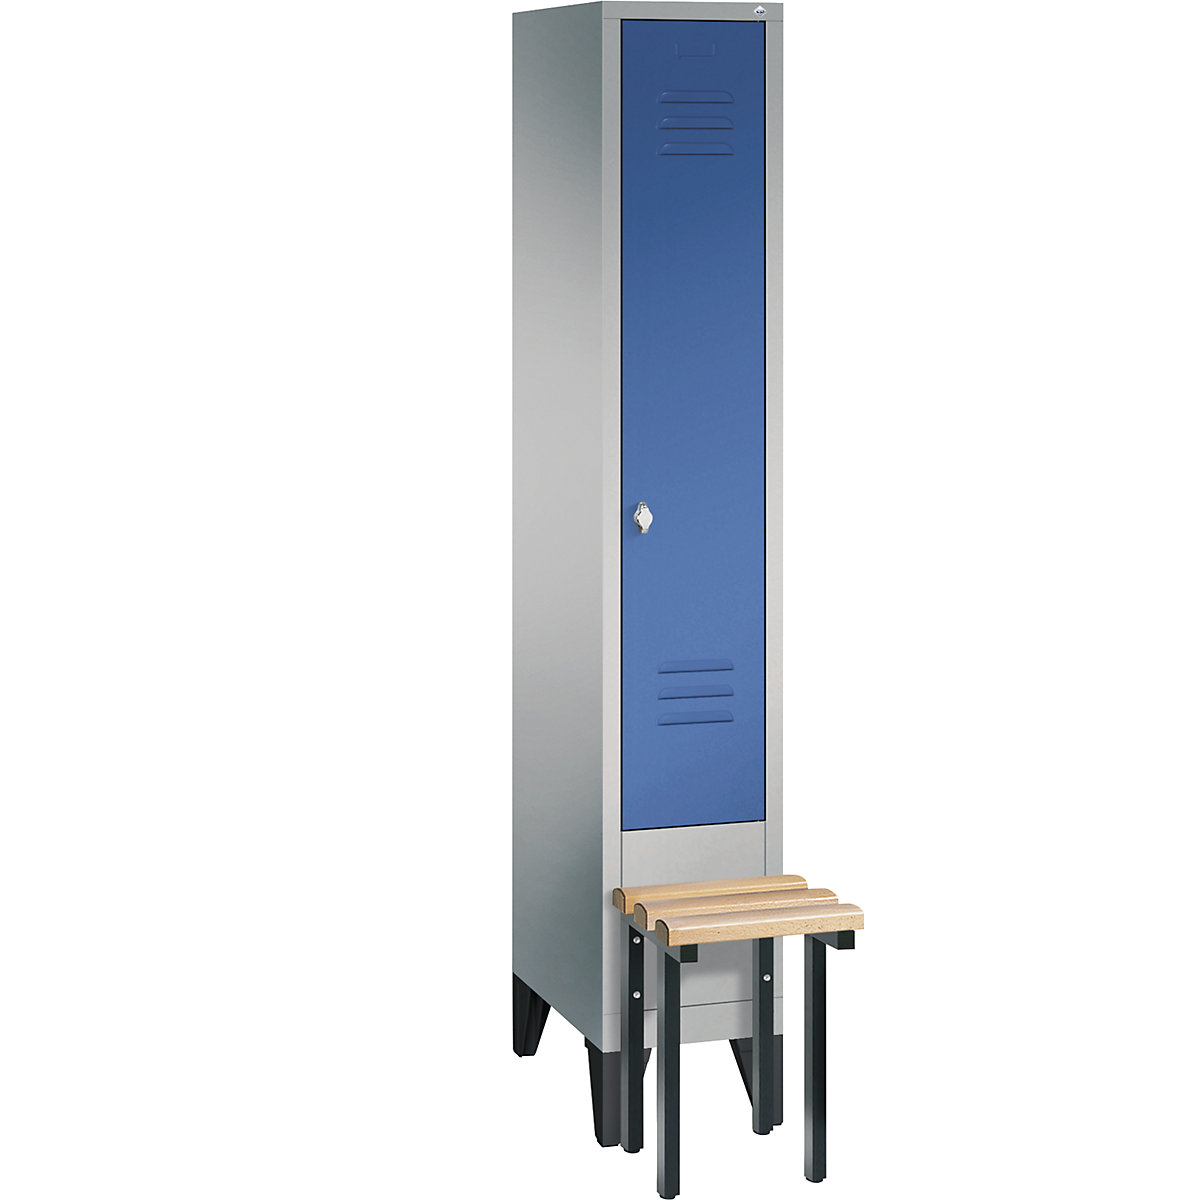 CLASSIC cloakroom locker with bench mounted in front – C+P, 1 compartment, compartment width 300 mm, white aluminium / gentian blue-10